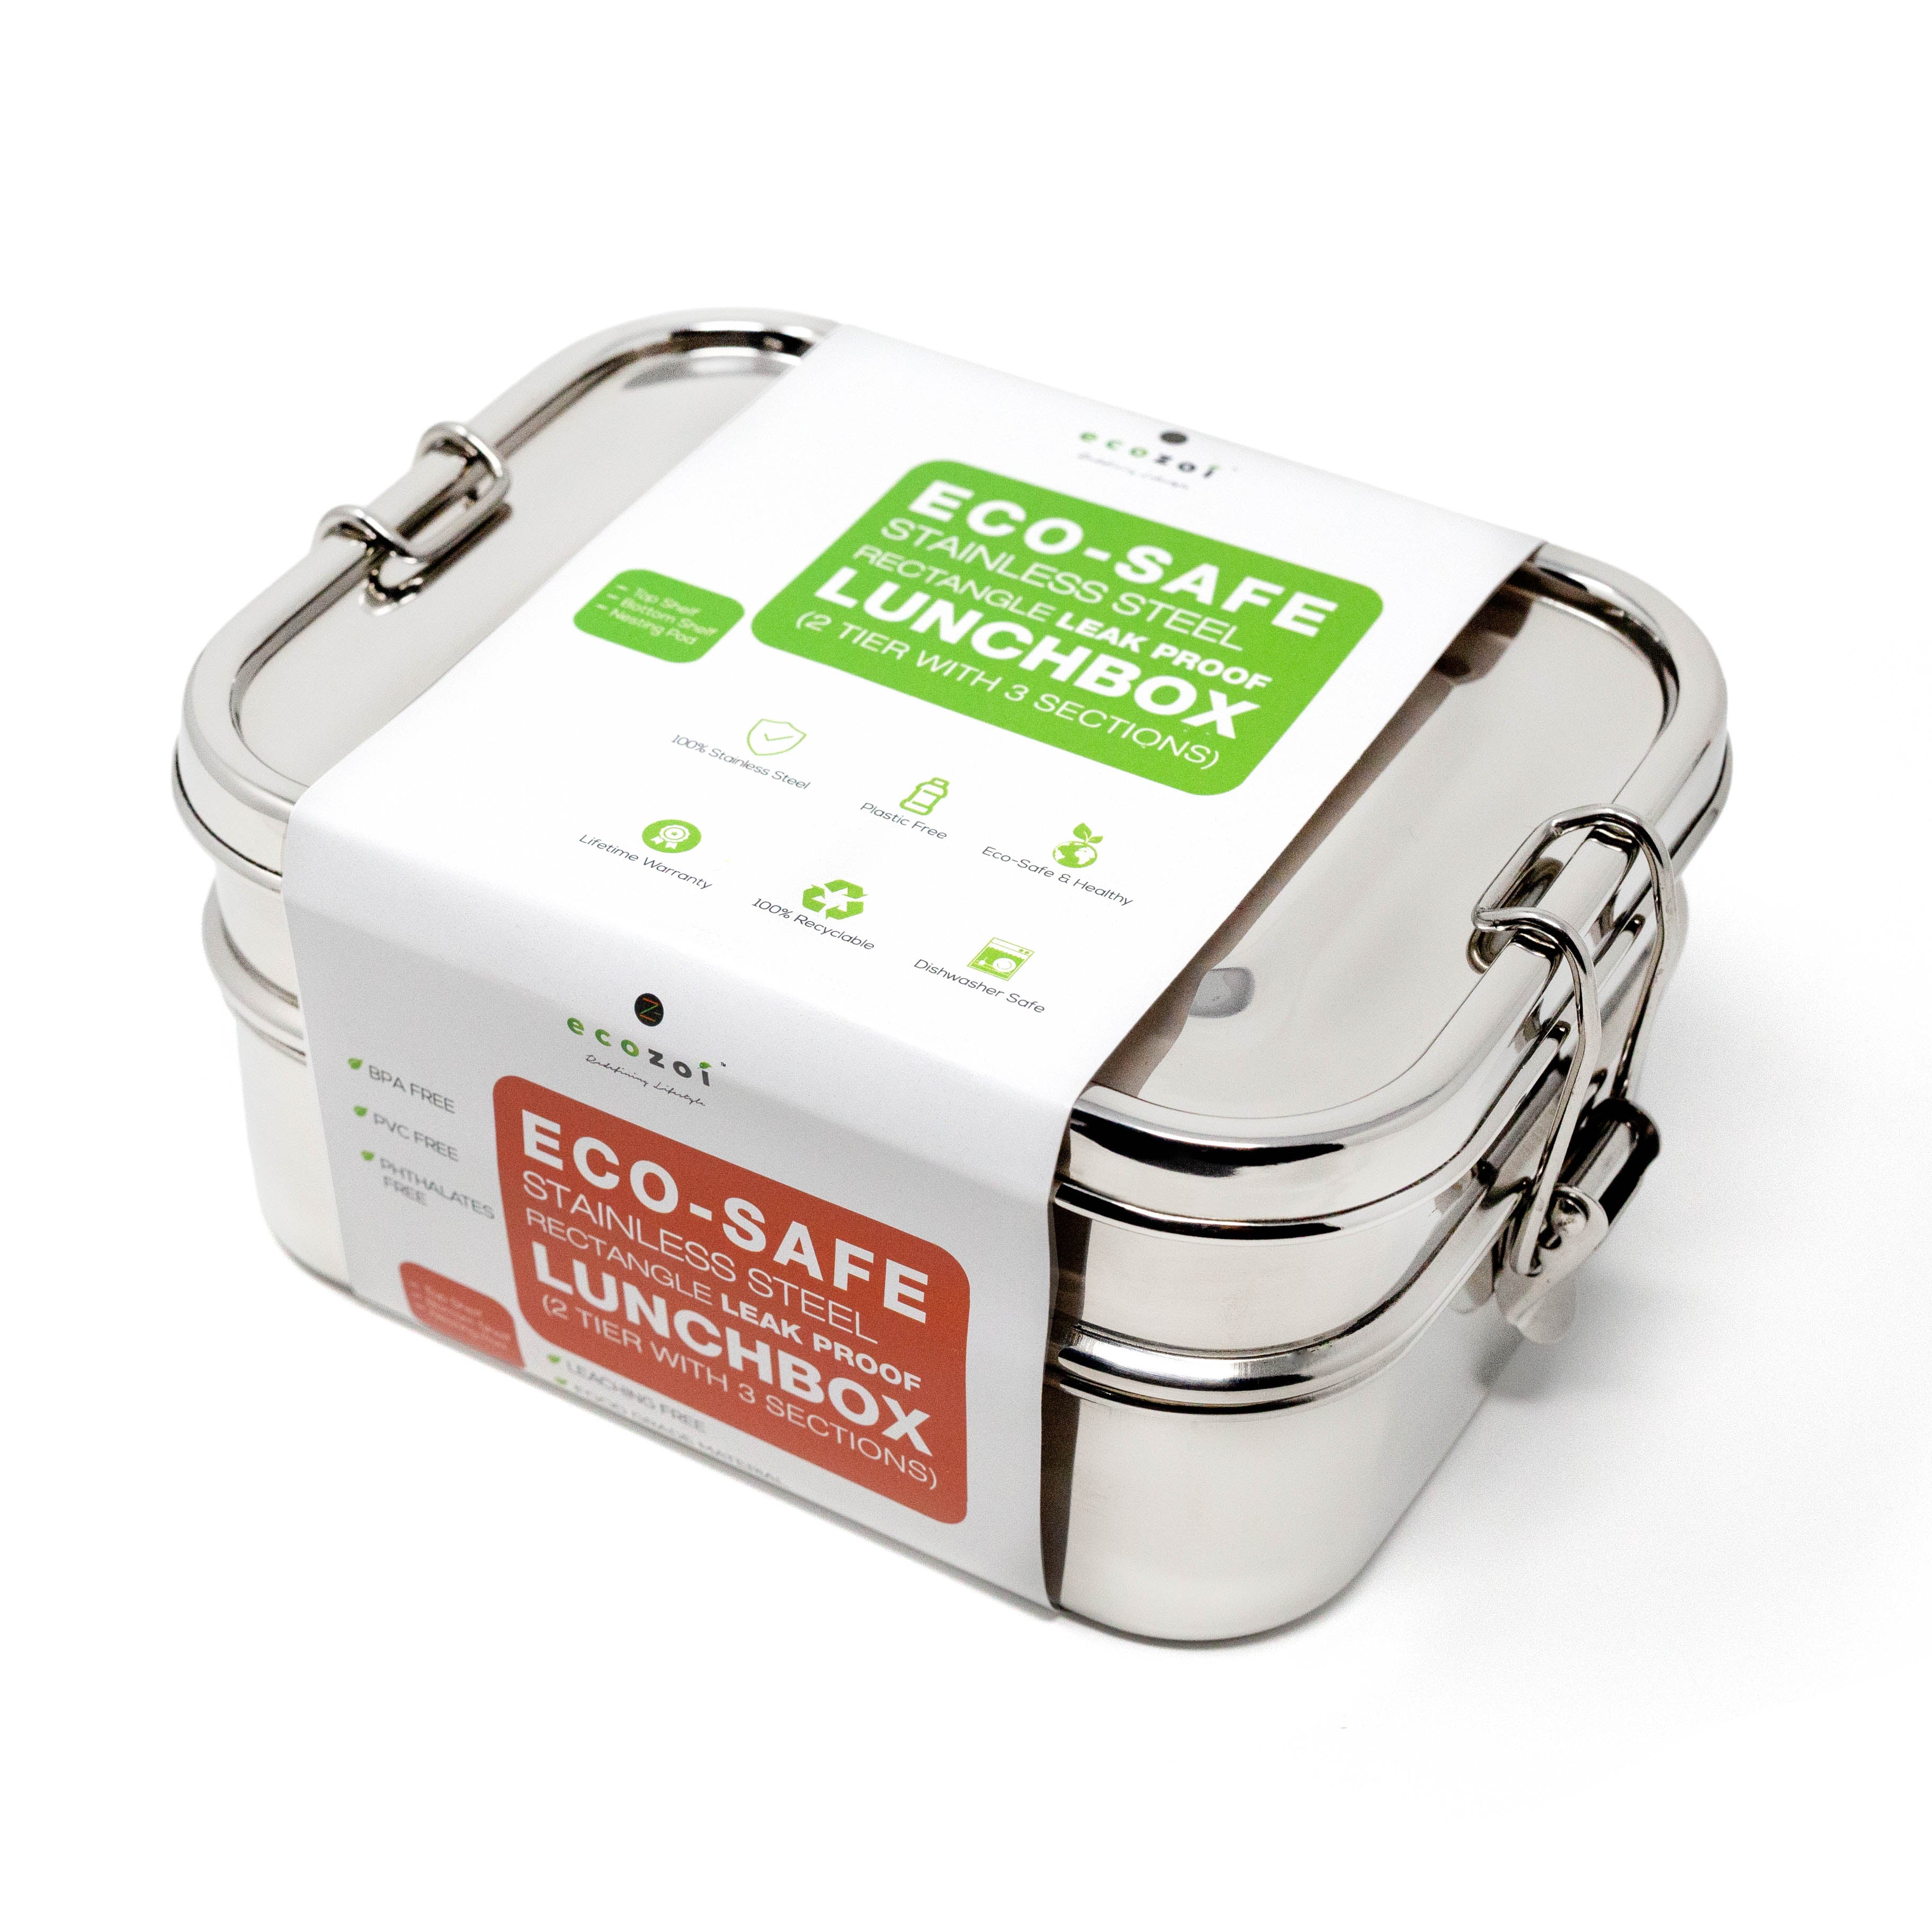 Stainless Steel Lunch Box #1 sustainable choice for a lifetime